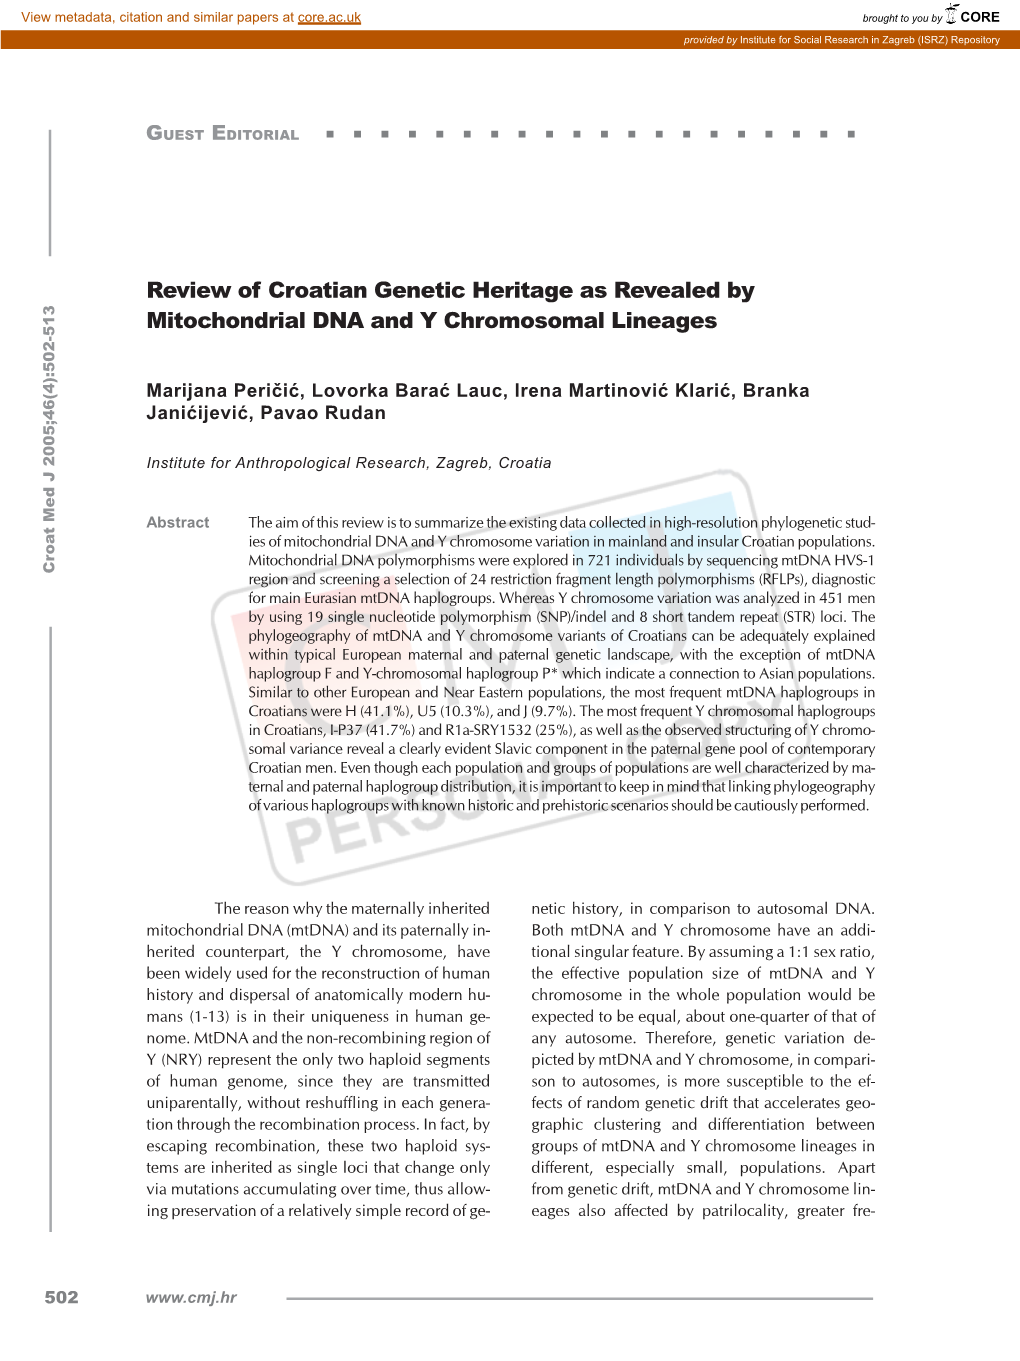 Review of Croatian Genetic Heritage As Revealed by Mitochondrial DNA and Y Chromosomal Lineages